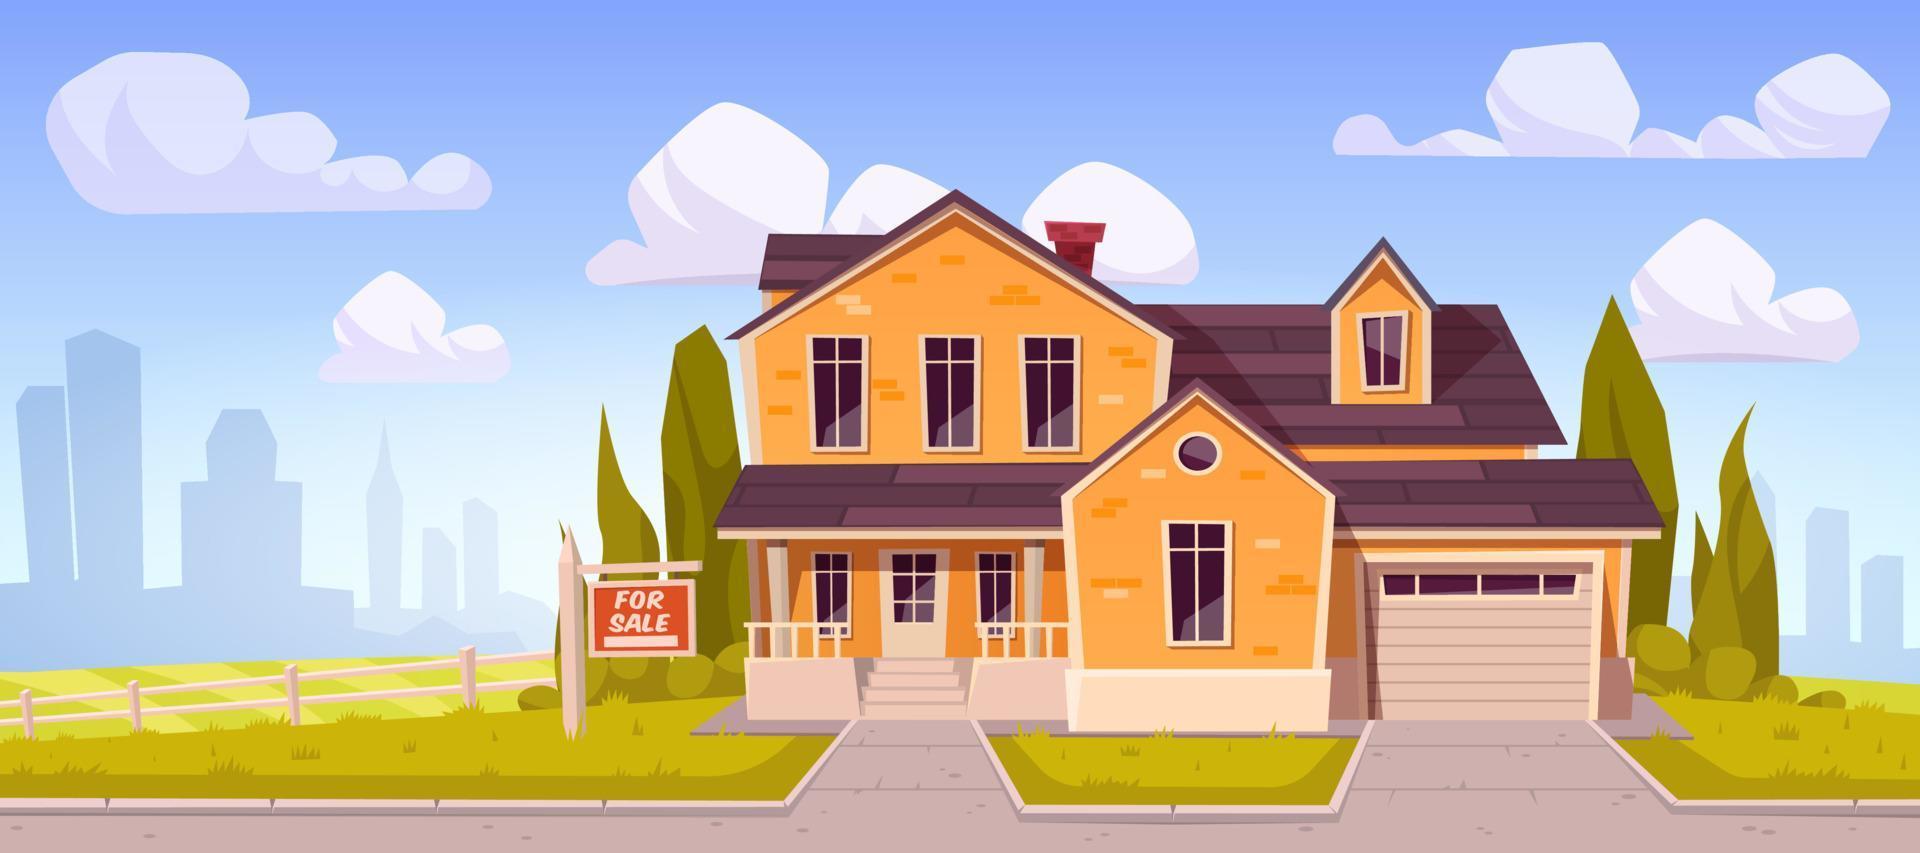 Suburban house with garage for sale vector